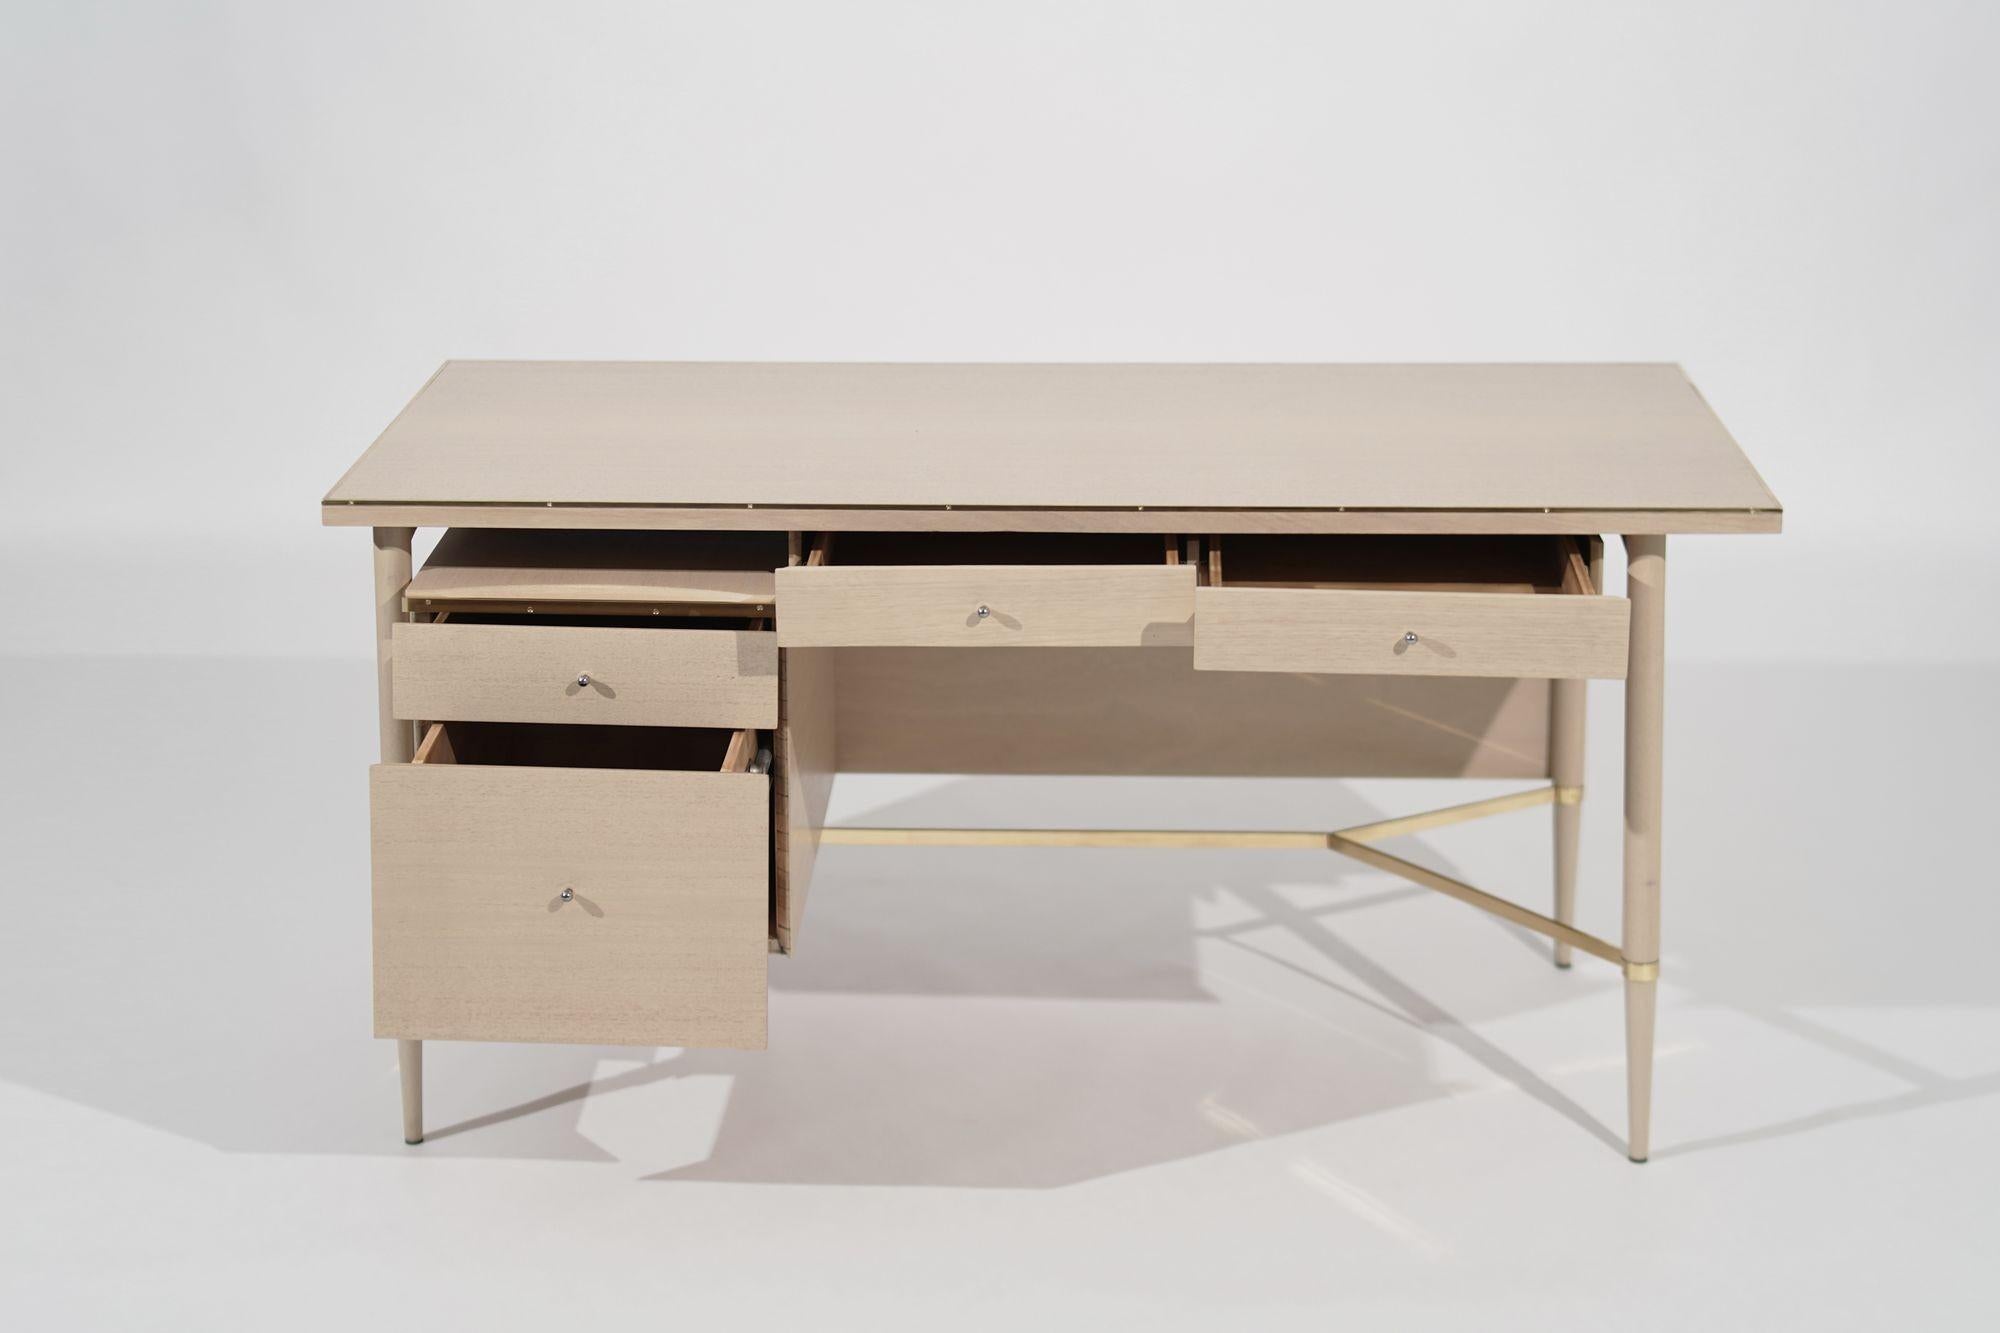 20th Century Bleached Mahogany Desk by Paul McCobb, Connoisseur Collection, C. 1950s For Sale